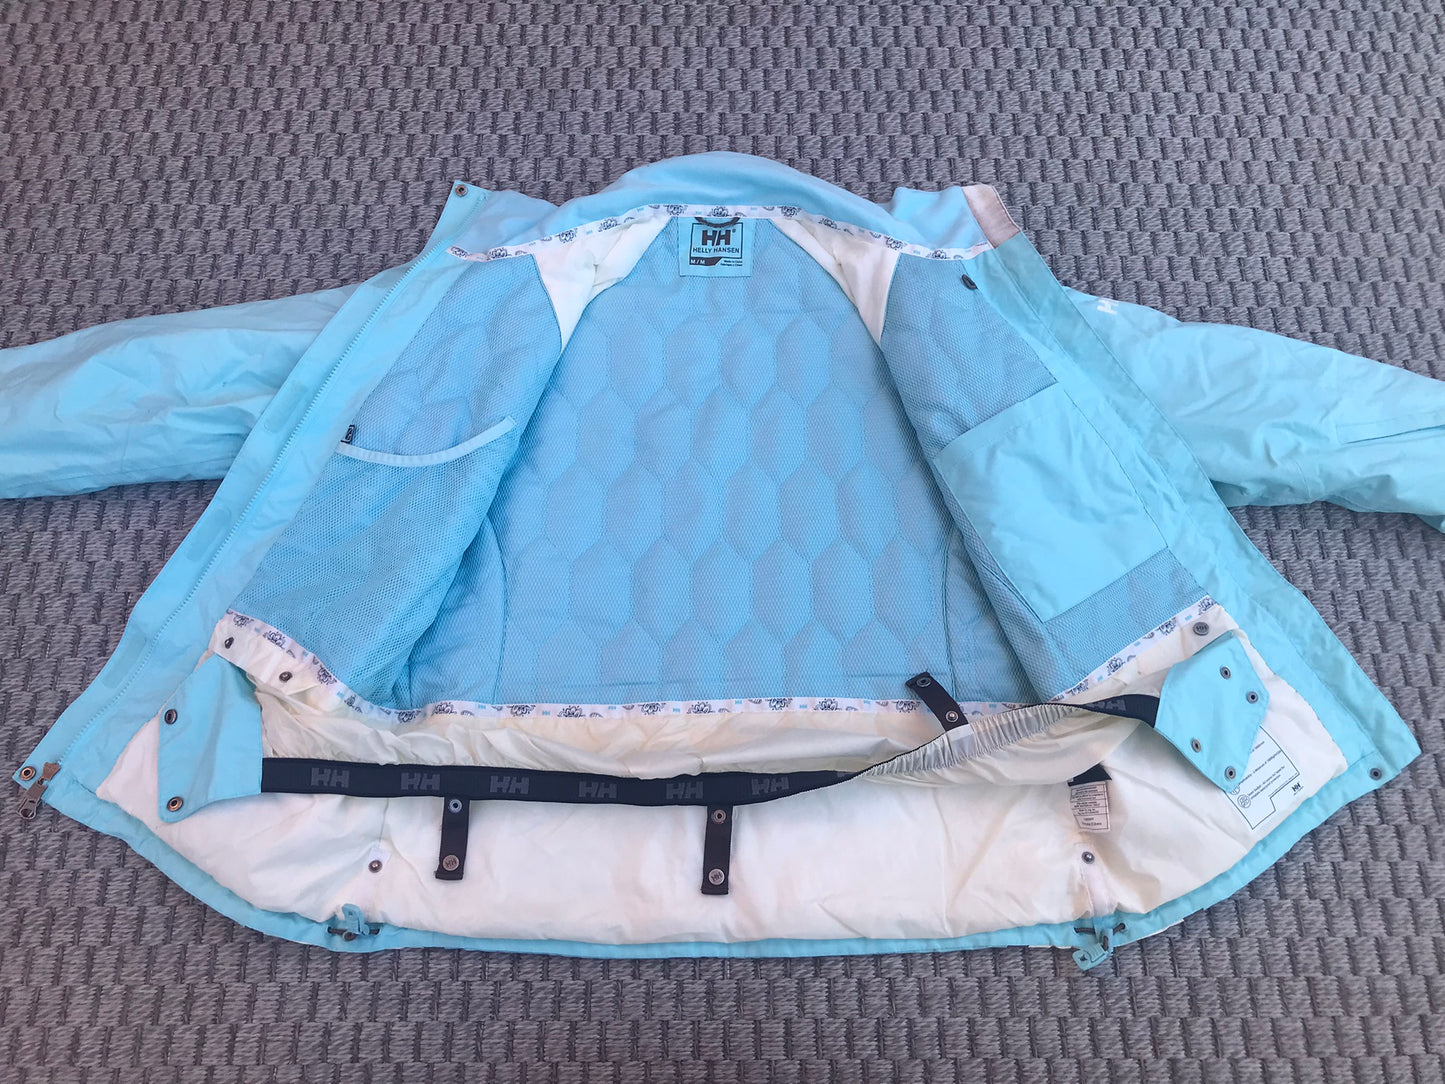 Winter Coat Ladies Size Medium Helly Hansen Aqua Blue White Waterproof With Sealed Seams and Zippers Snow Belt Like New